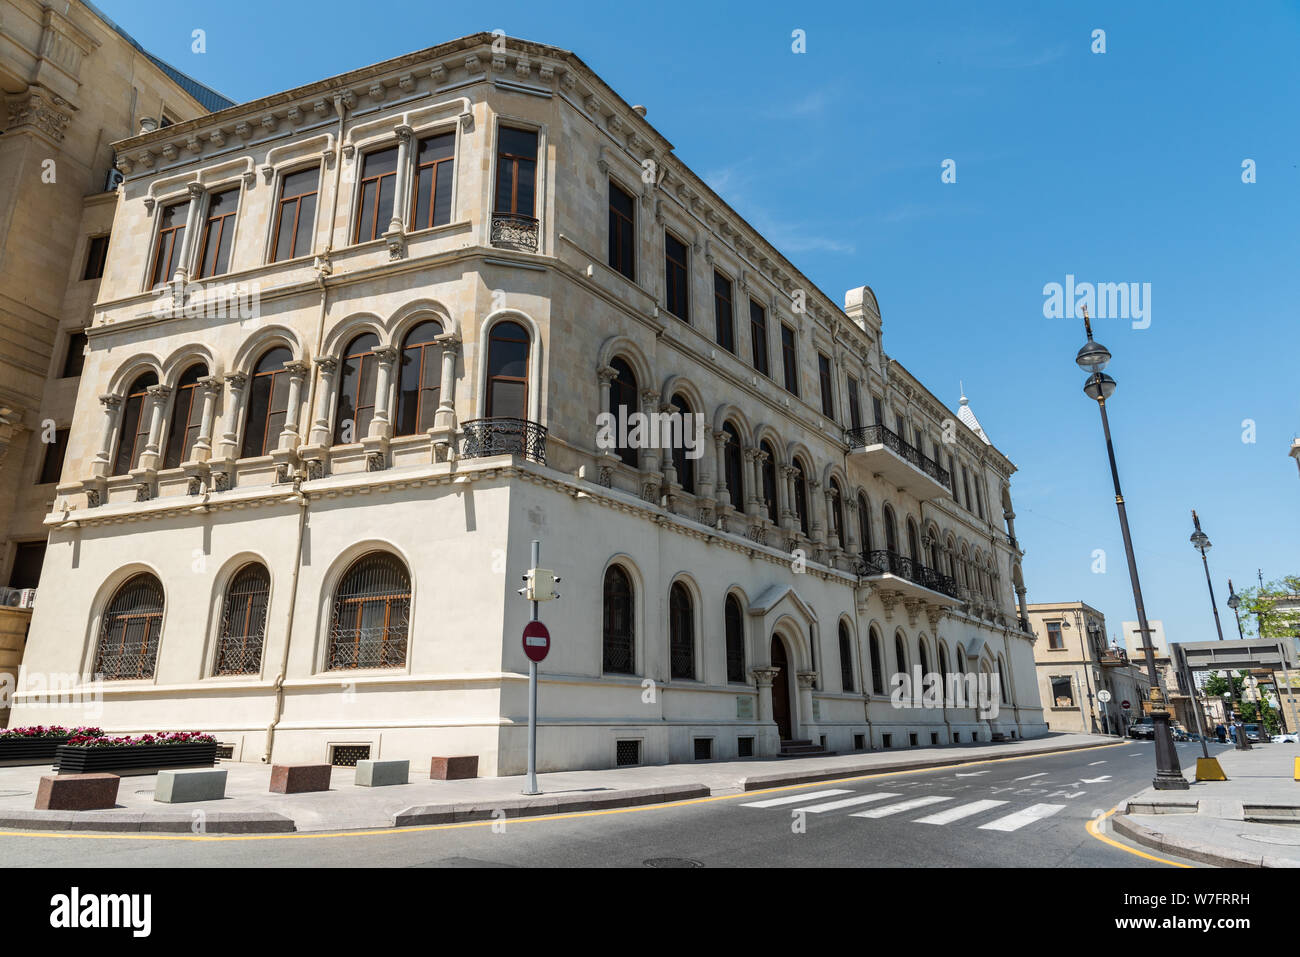 Baku, Azerbaijan - May 9, 2019. Exterior view of the building housing the General Prosecutor Administration of the Republic of Azerbaijan and the Muse Stock Photo